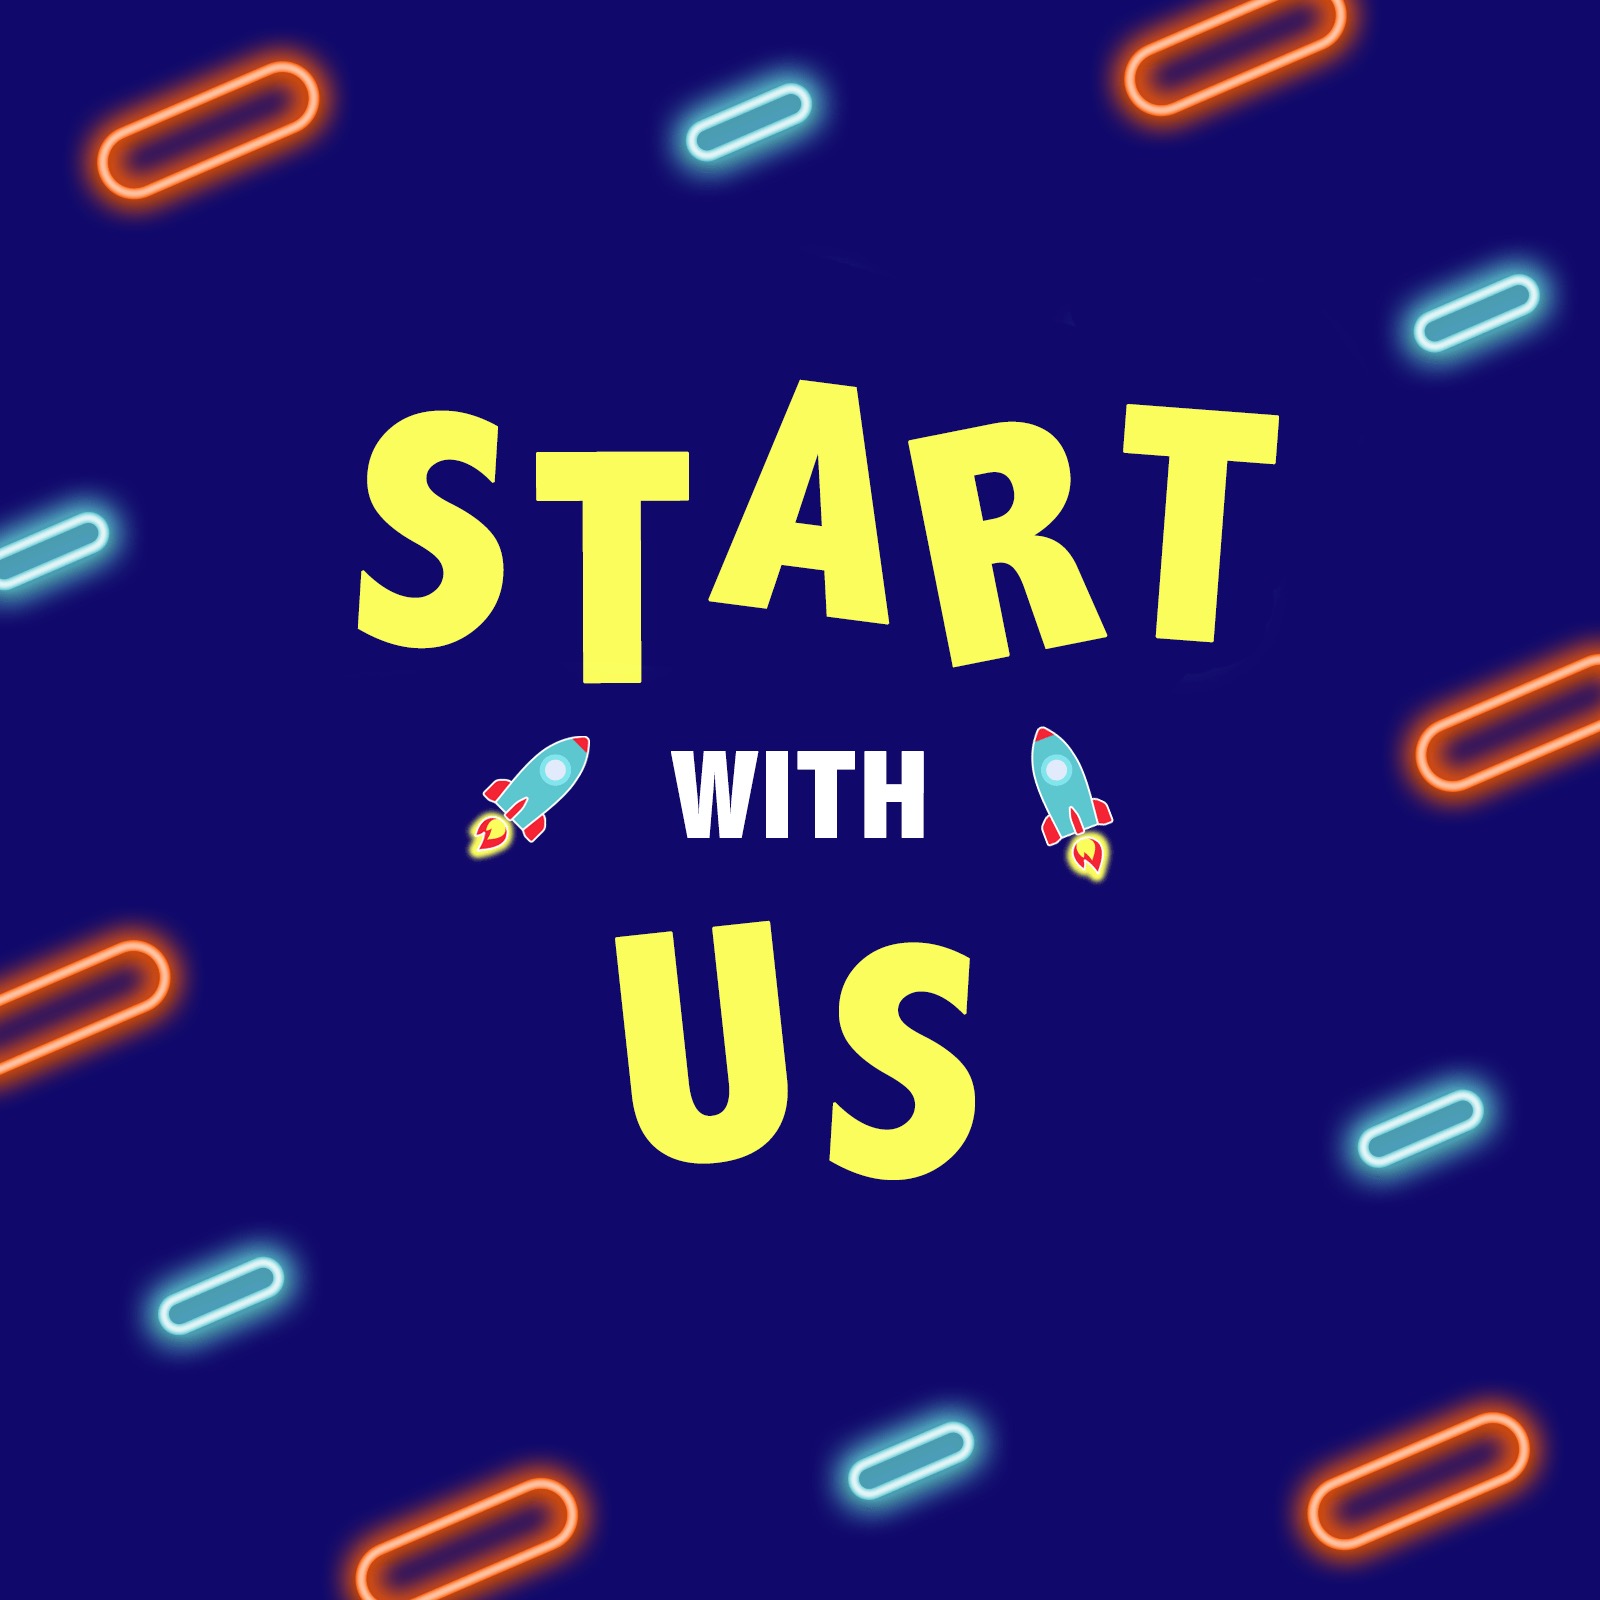 Start with us